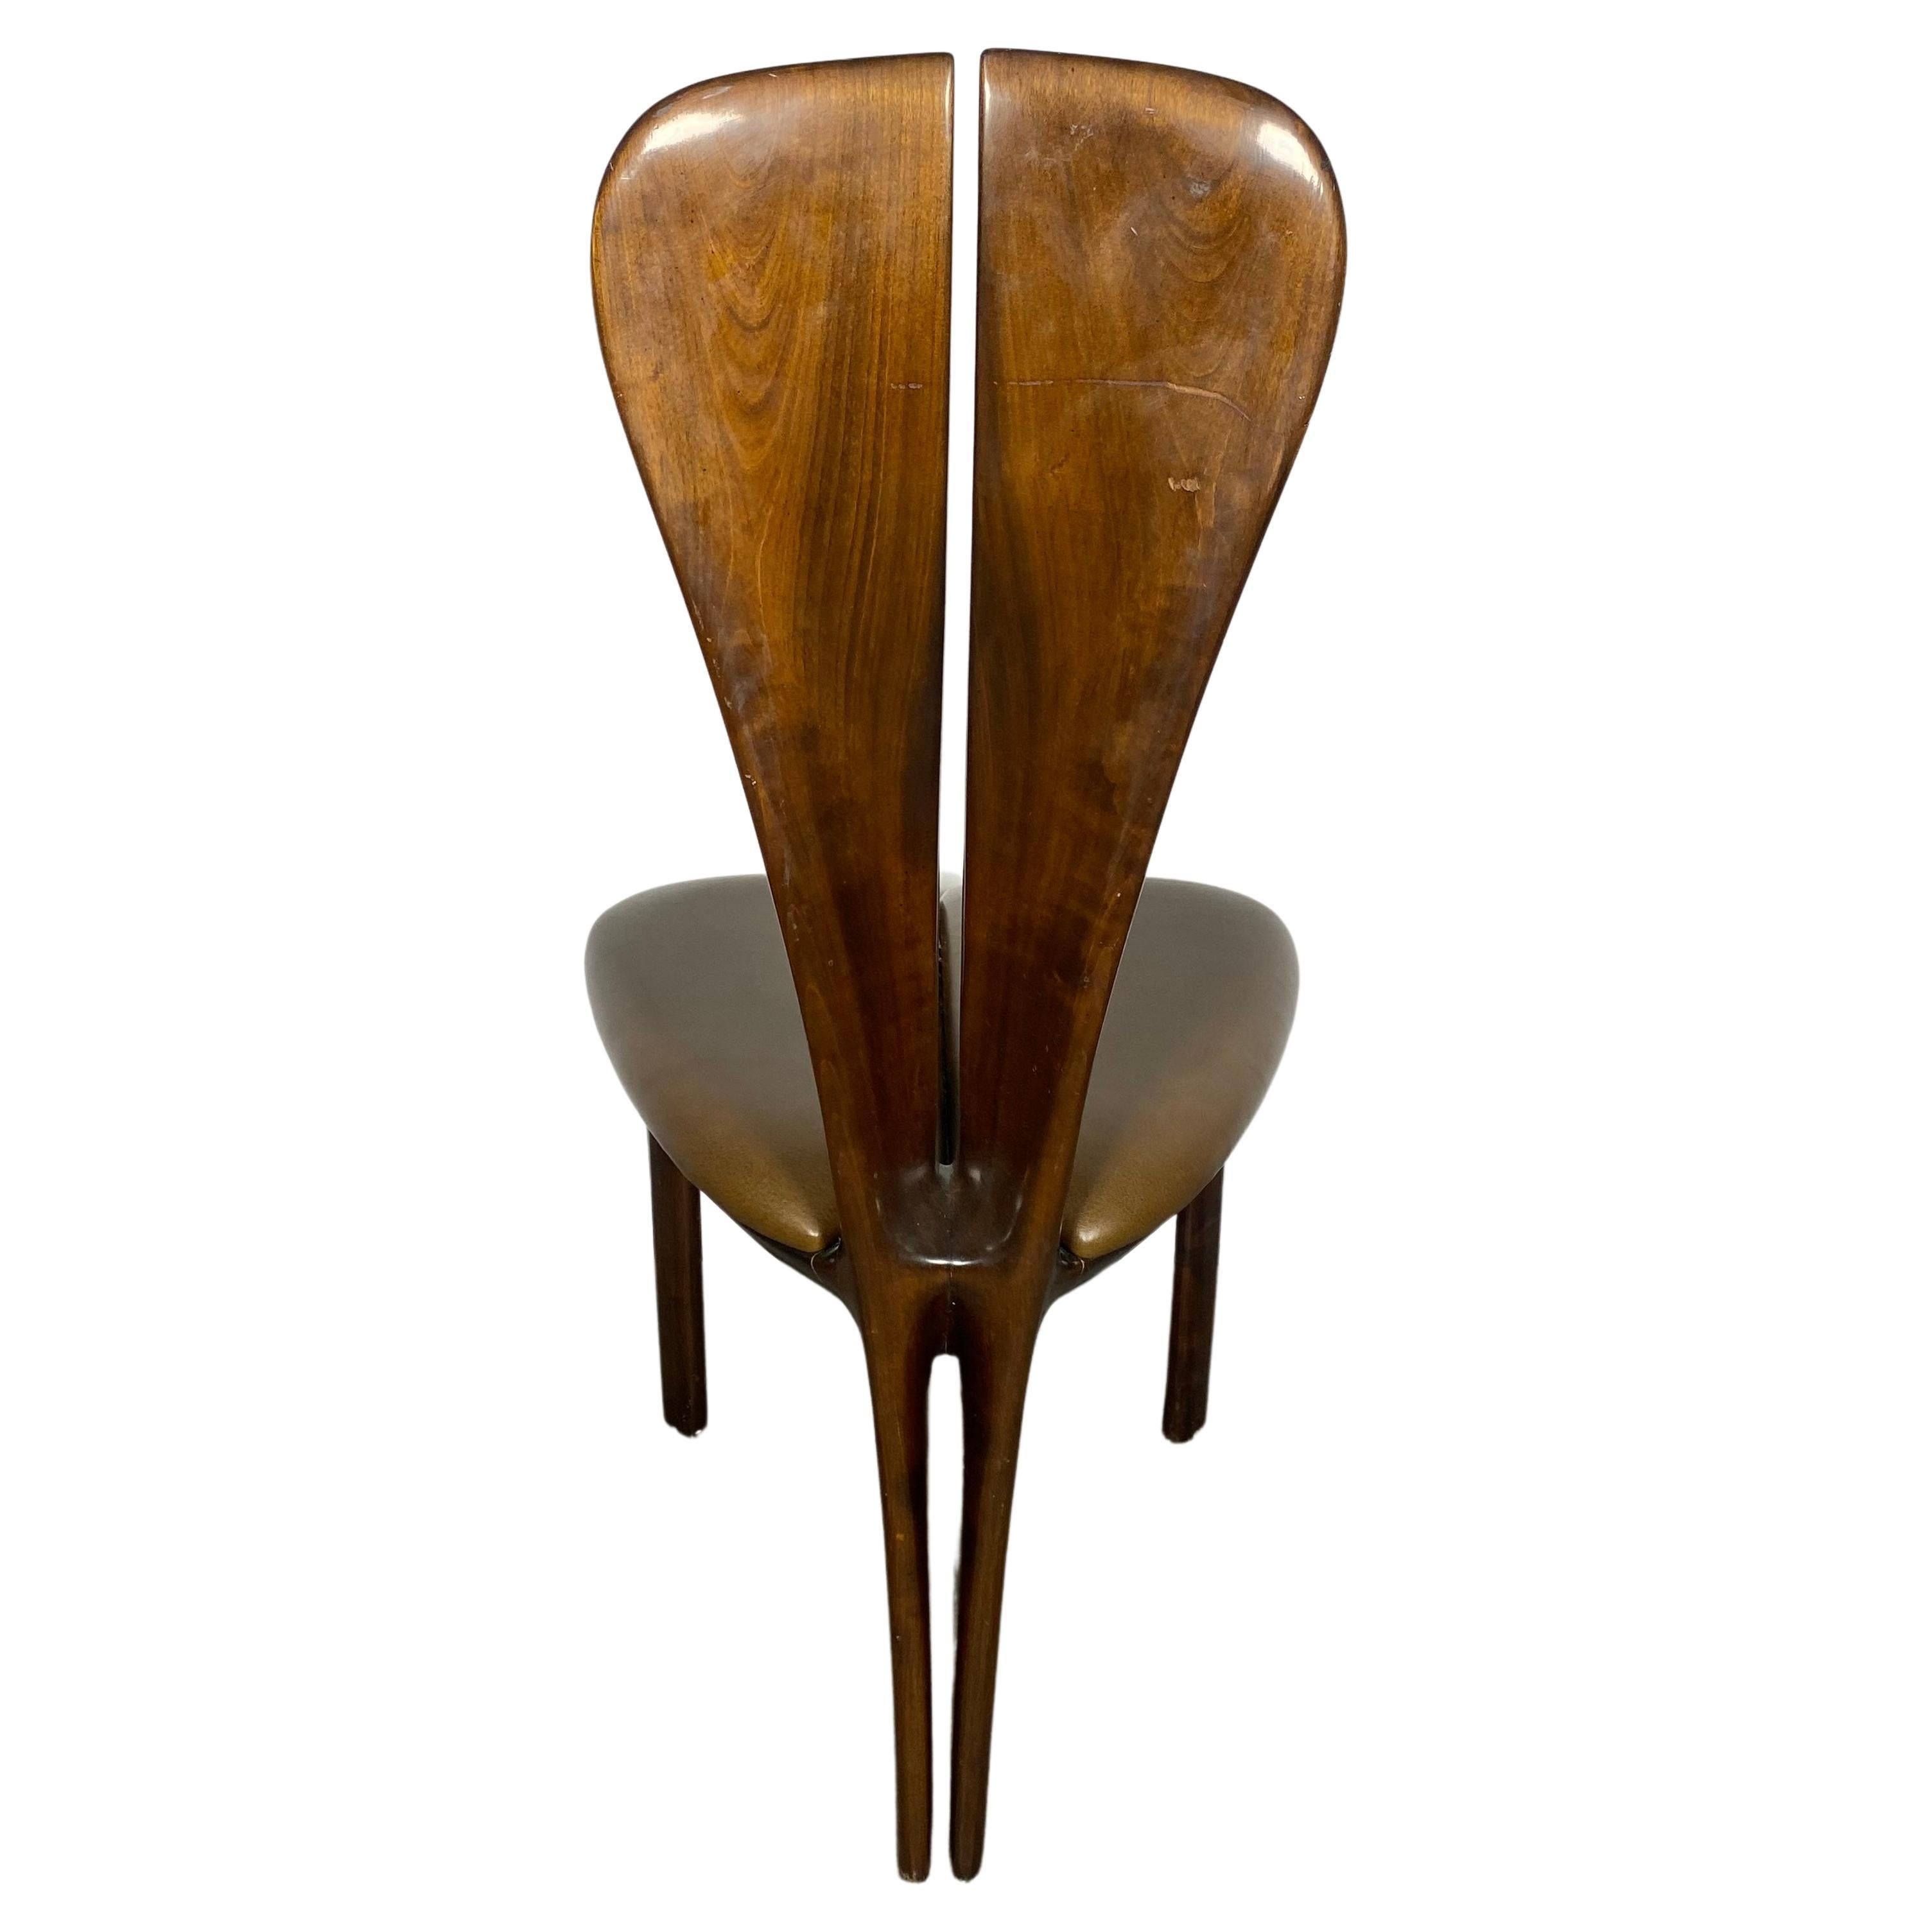 Unusual post modernist sculpted wood side/ desk chair by Edward Axel Roffman For Sale